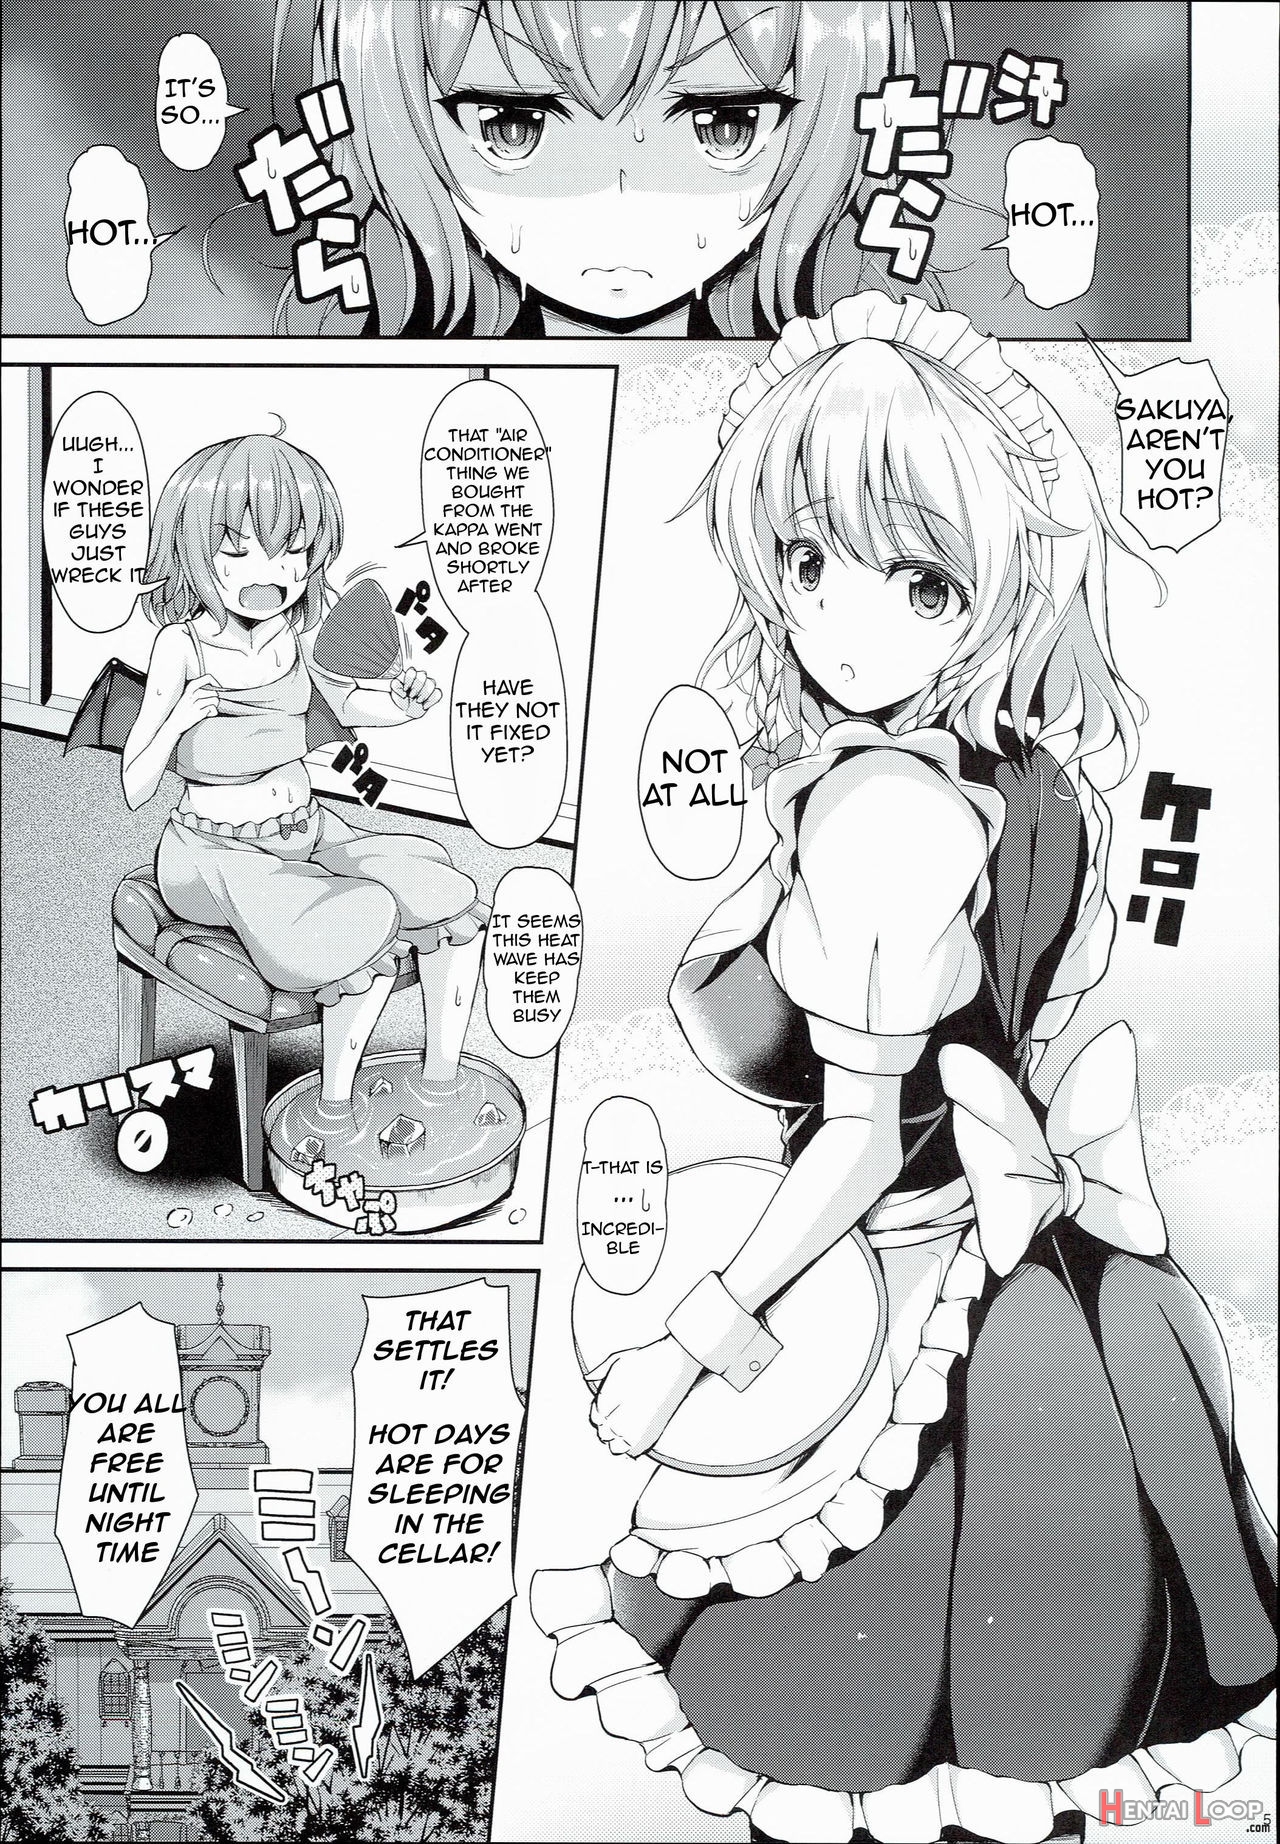 Page 1 of Because Sakuya Changed Into A Swimsuit (by Koza) - Hentai  doujinshi for free at HentaiLoop